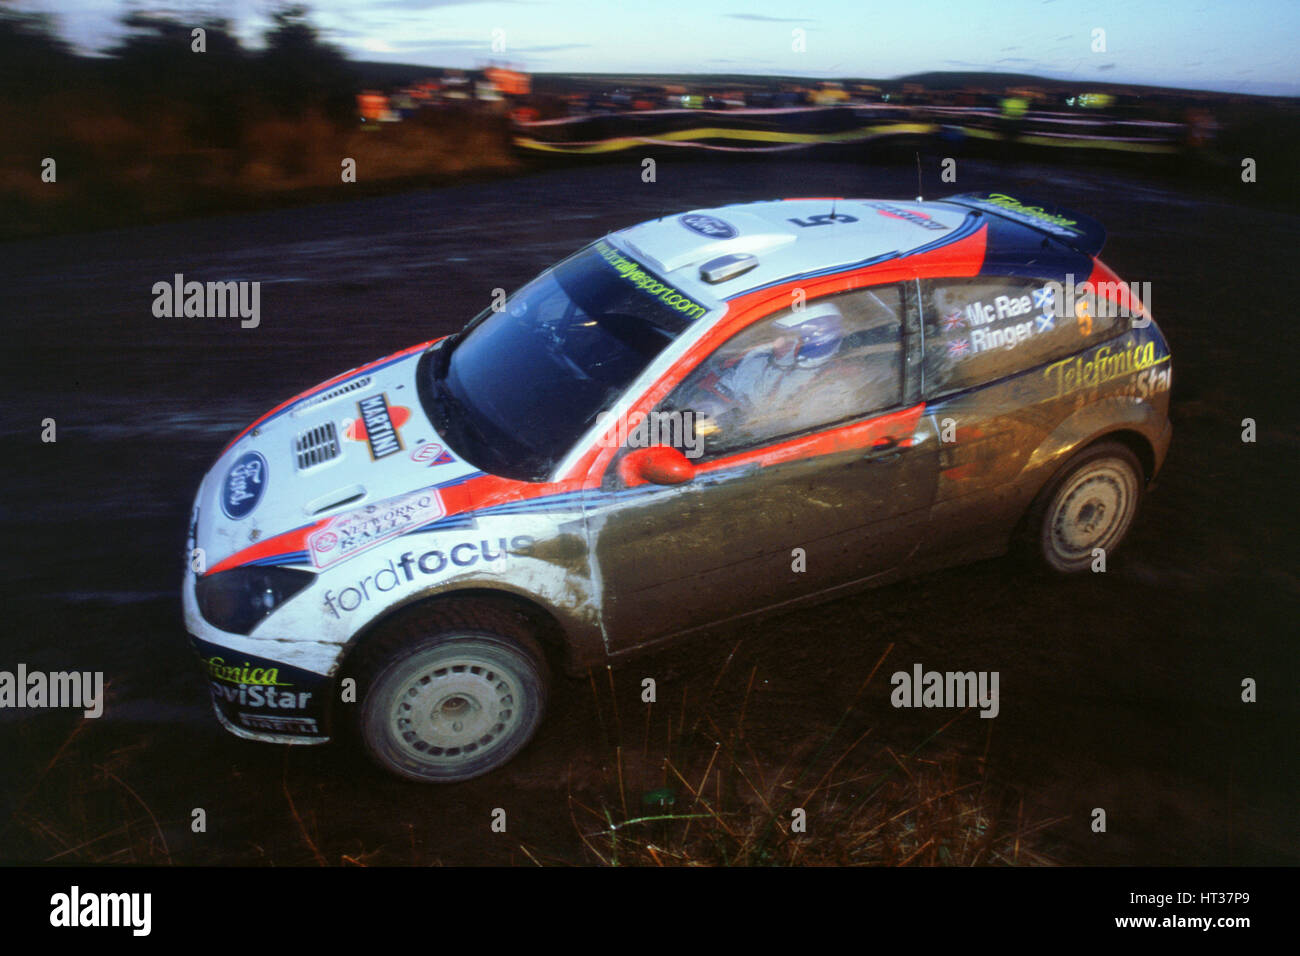 Colin McRae in Ford Focus RS WRC, Network Q rally2002. Artist: Unknown. Stock Photo